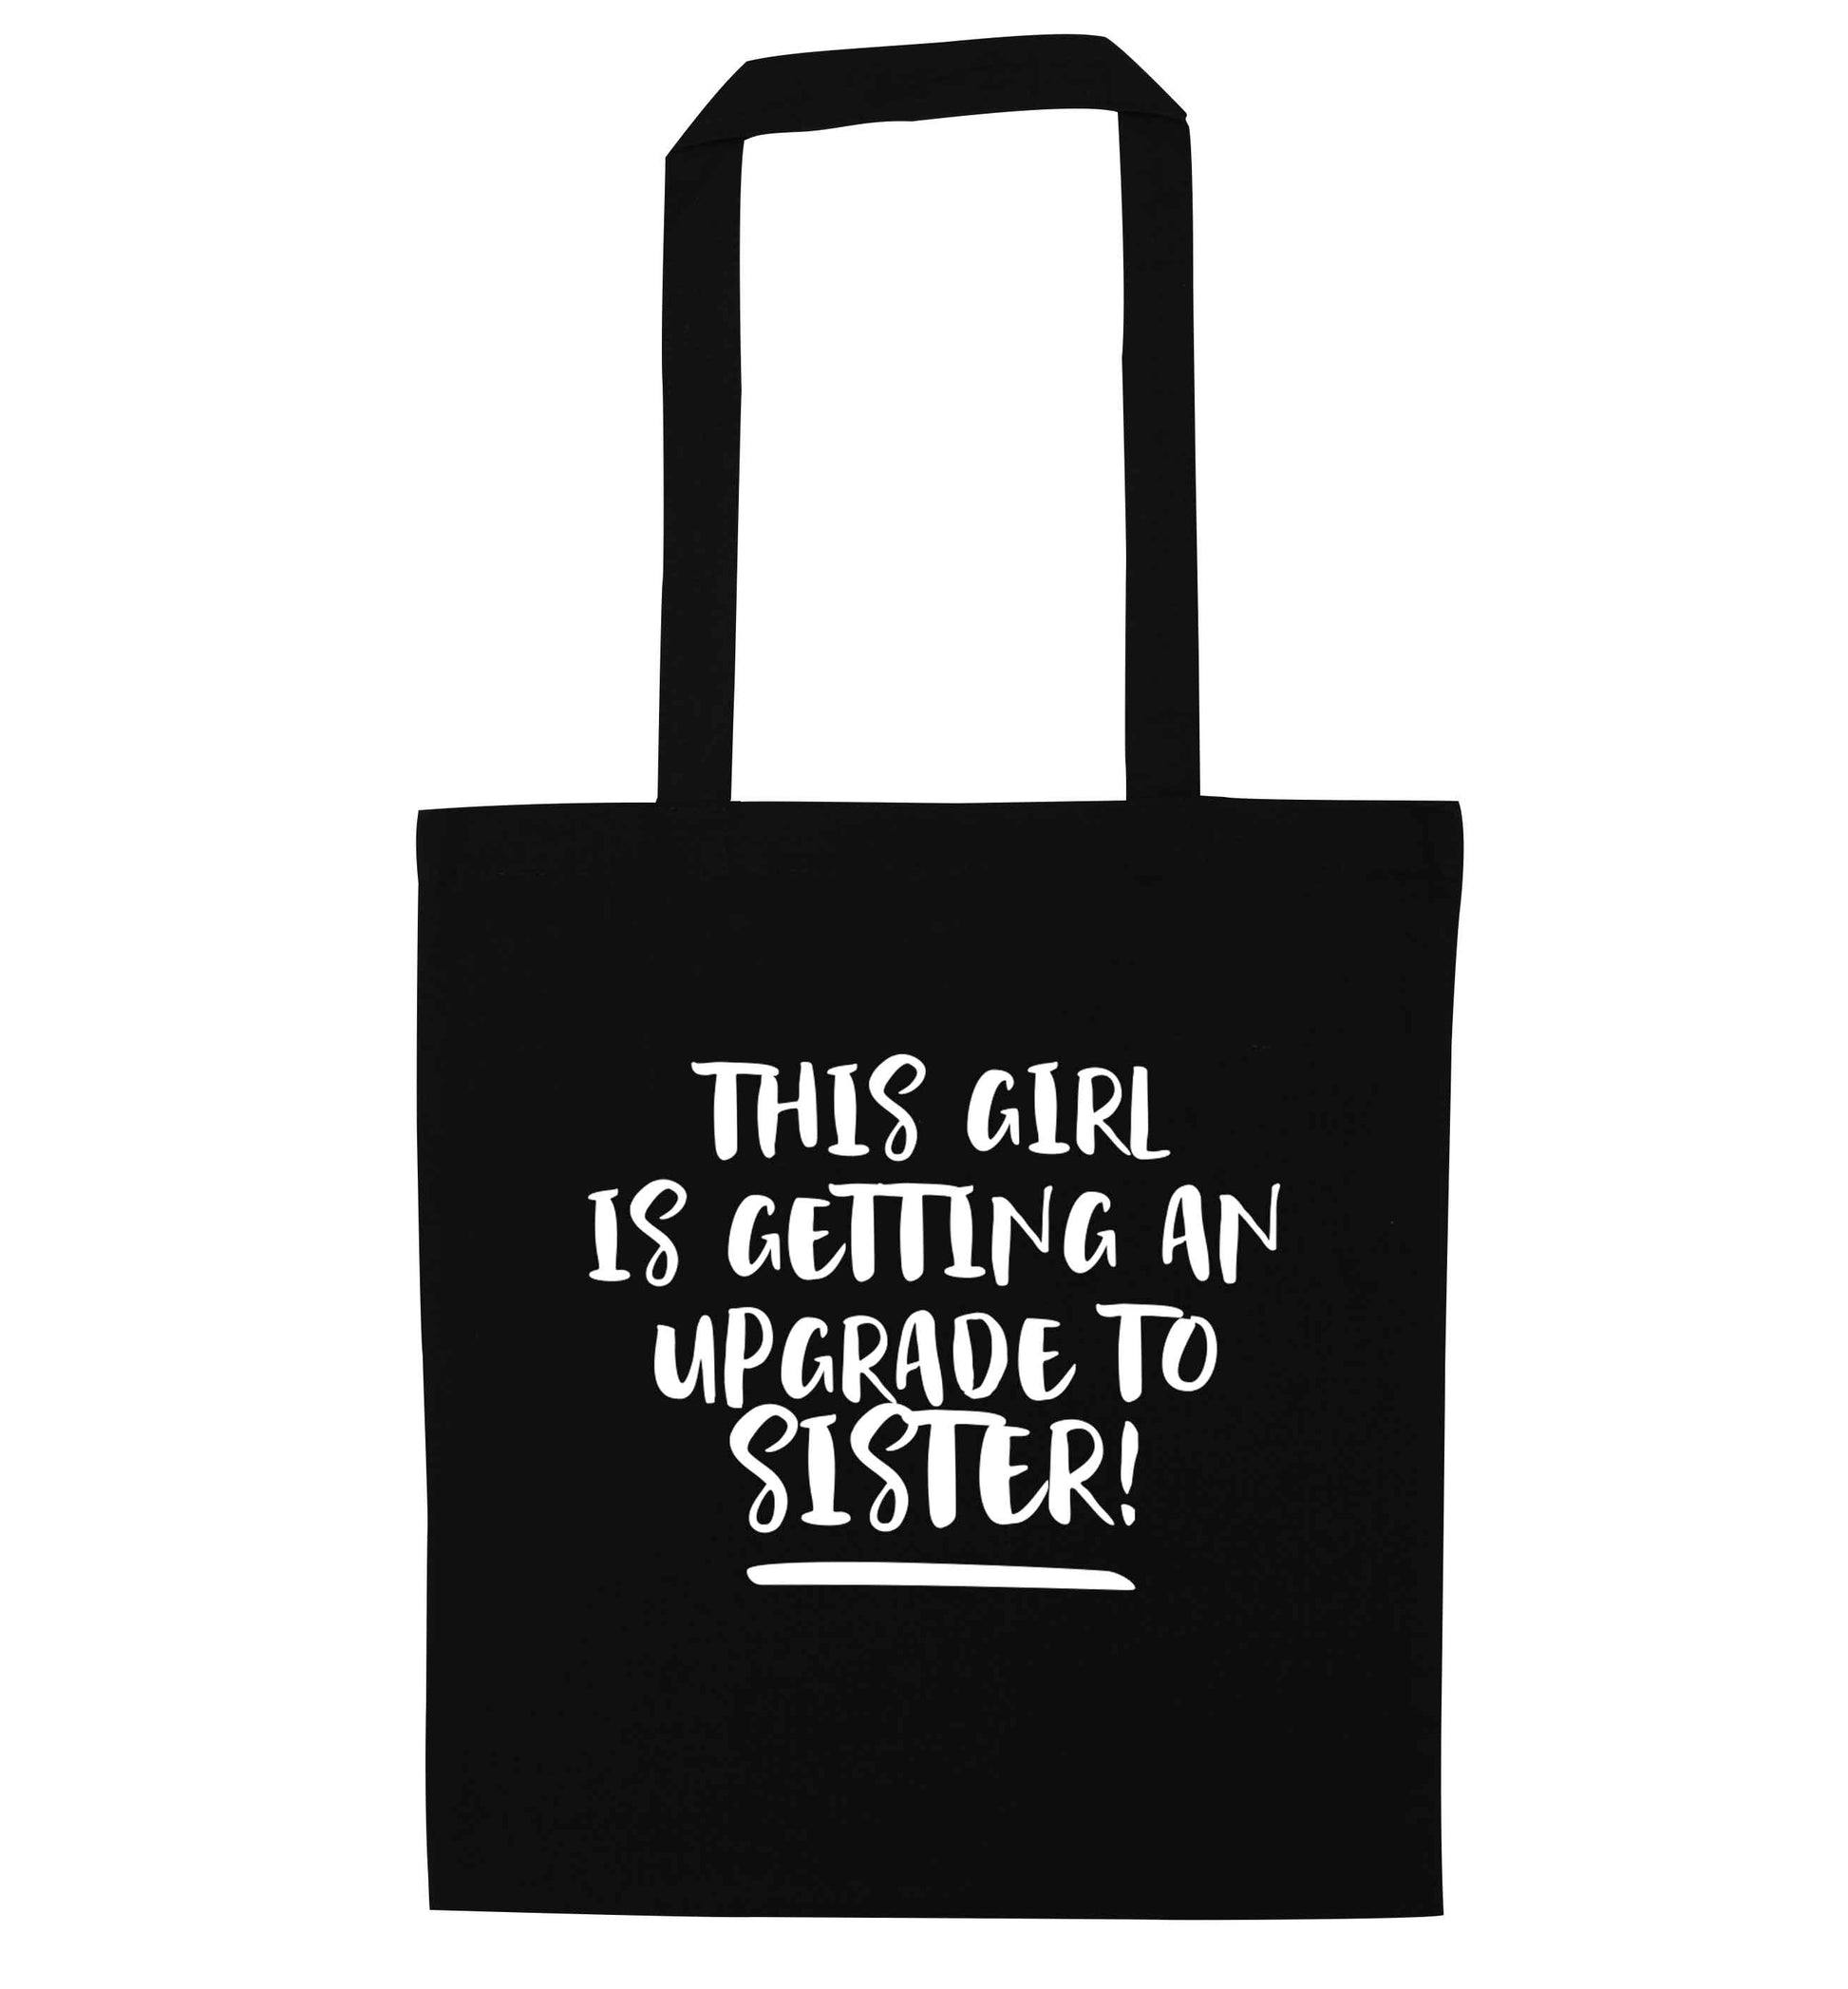 This girl is getting an upgrade to sister! black tote bag